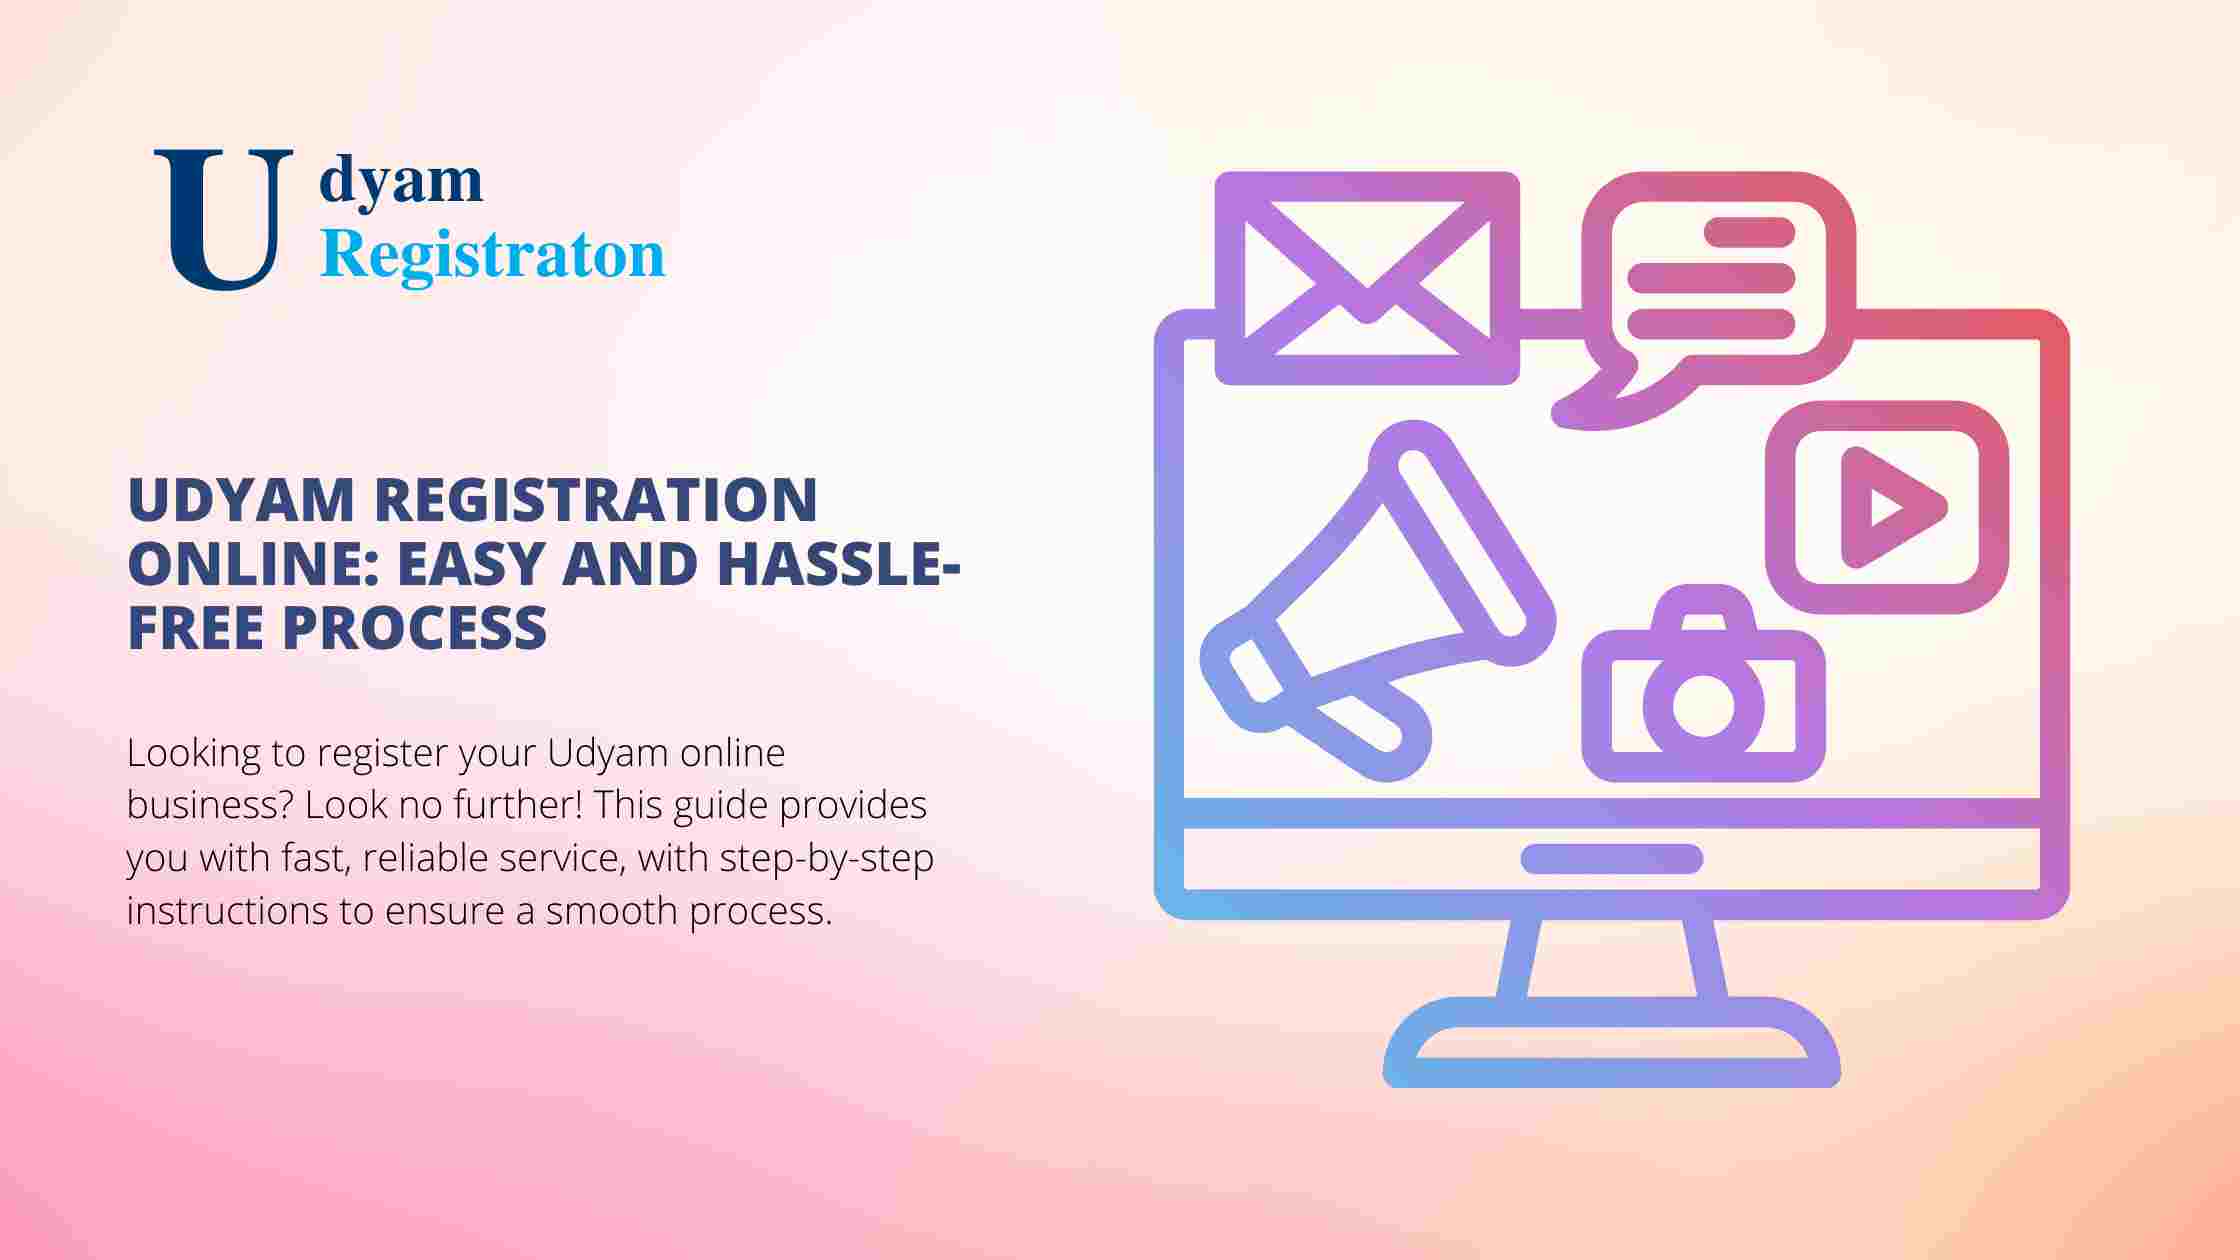 Udyam Registration Online Easy and Hassle-free Process (1)